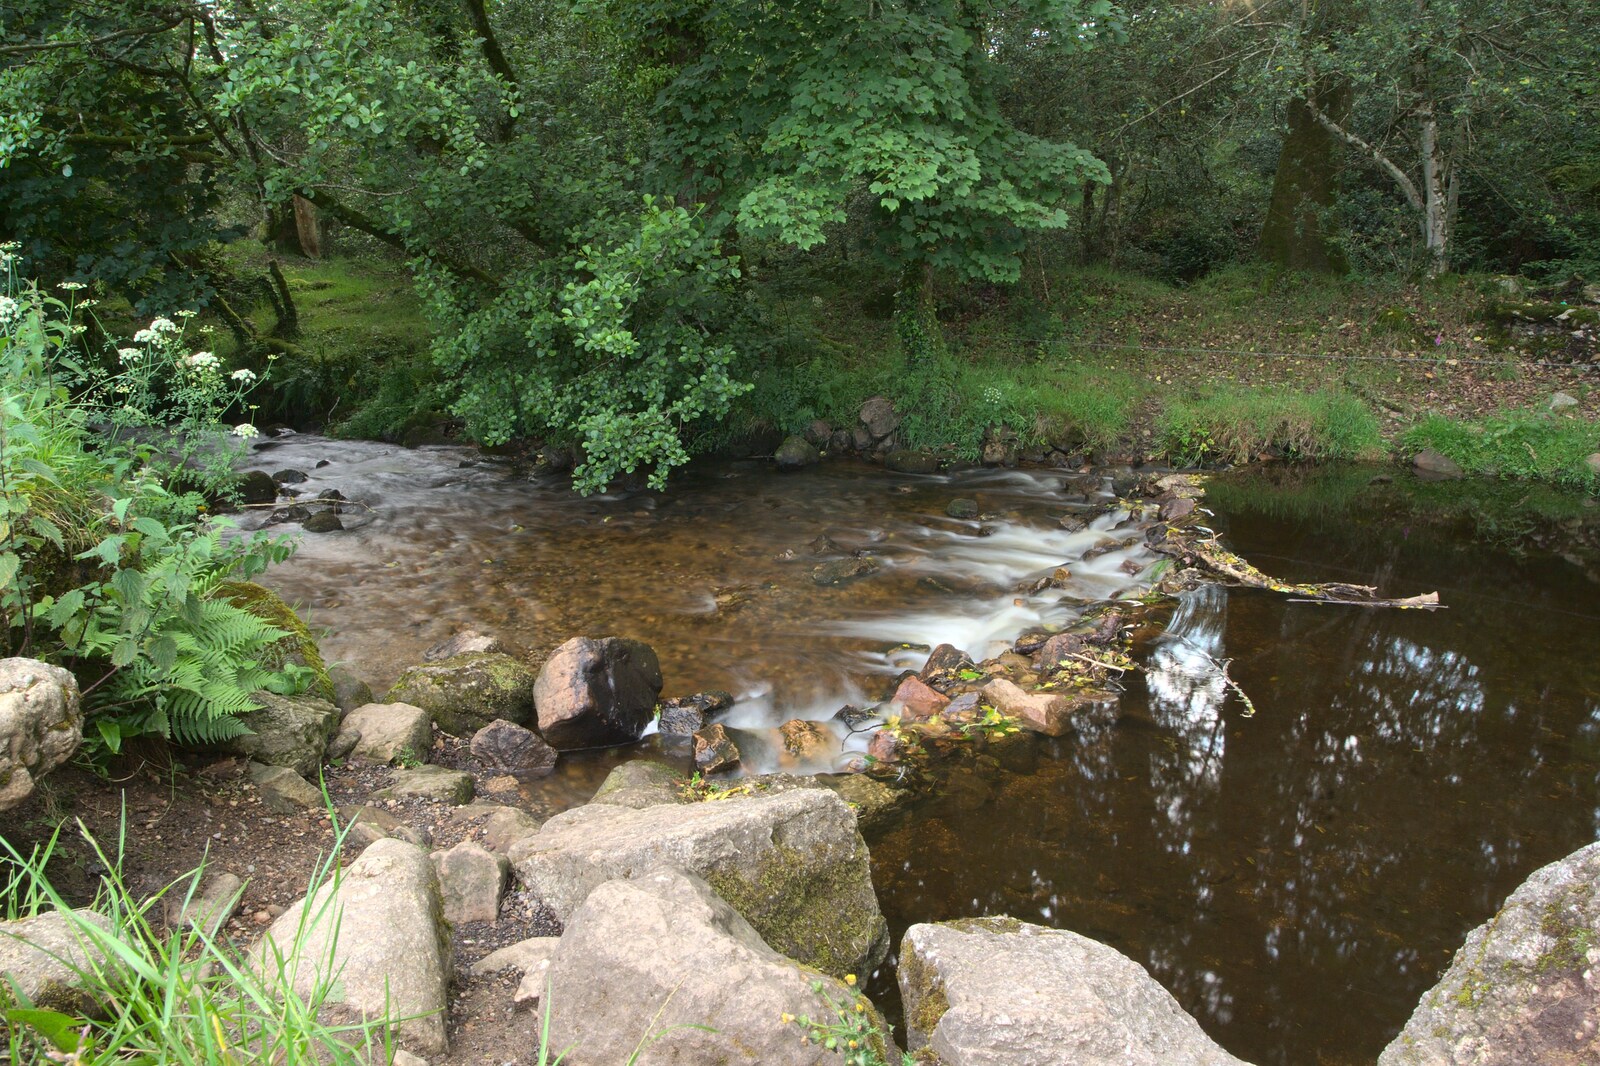 The river by the campsite from A Camper Van Odyssey: Charmouth, Plymouth, Dartmoor and Bath - 20th June 2011